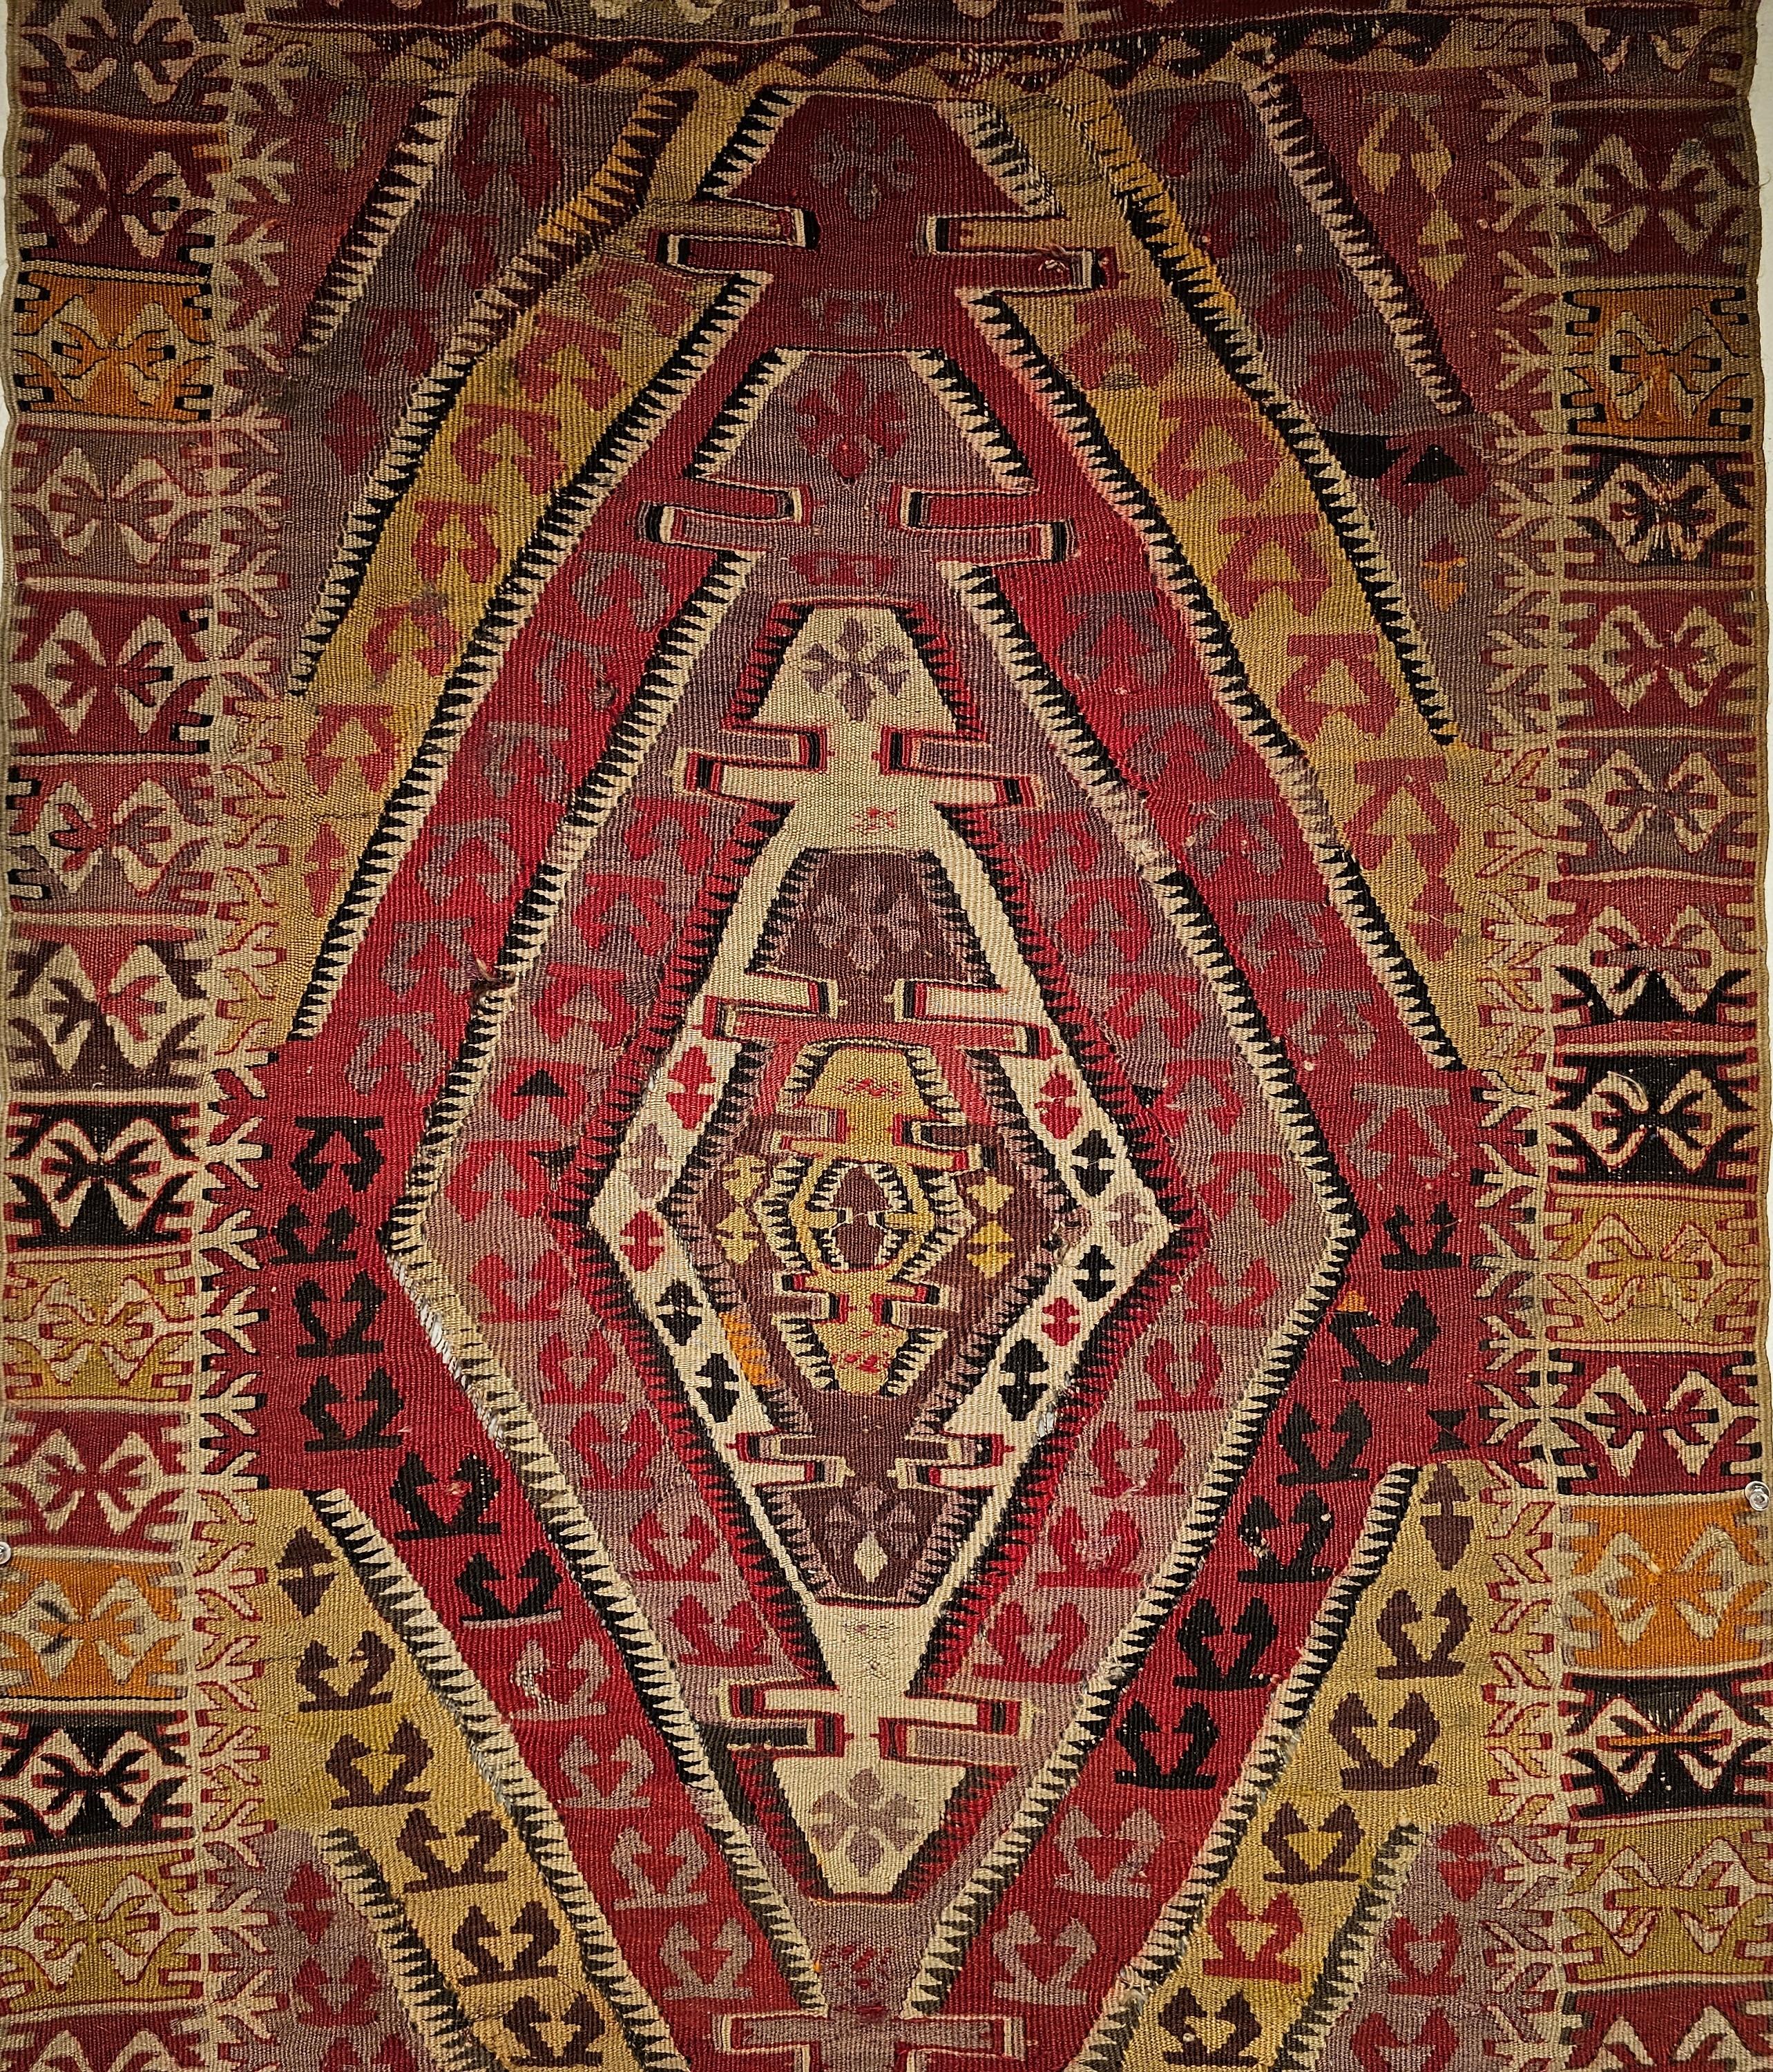  The beautiful Anatolian Kilim area rug with a very unique geometric pattern of radiating medallion from the center each with a different background color including ivory, pink, red, yellow and brown.  The earth tone colors produced by the use of